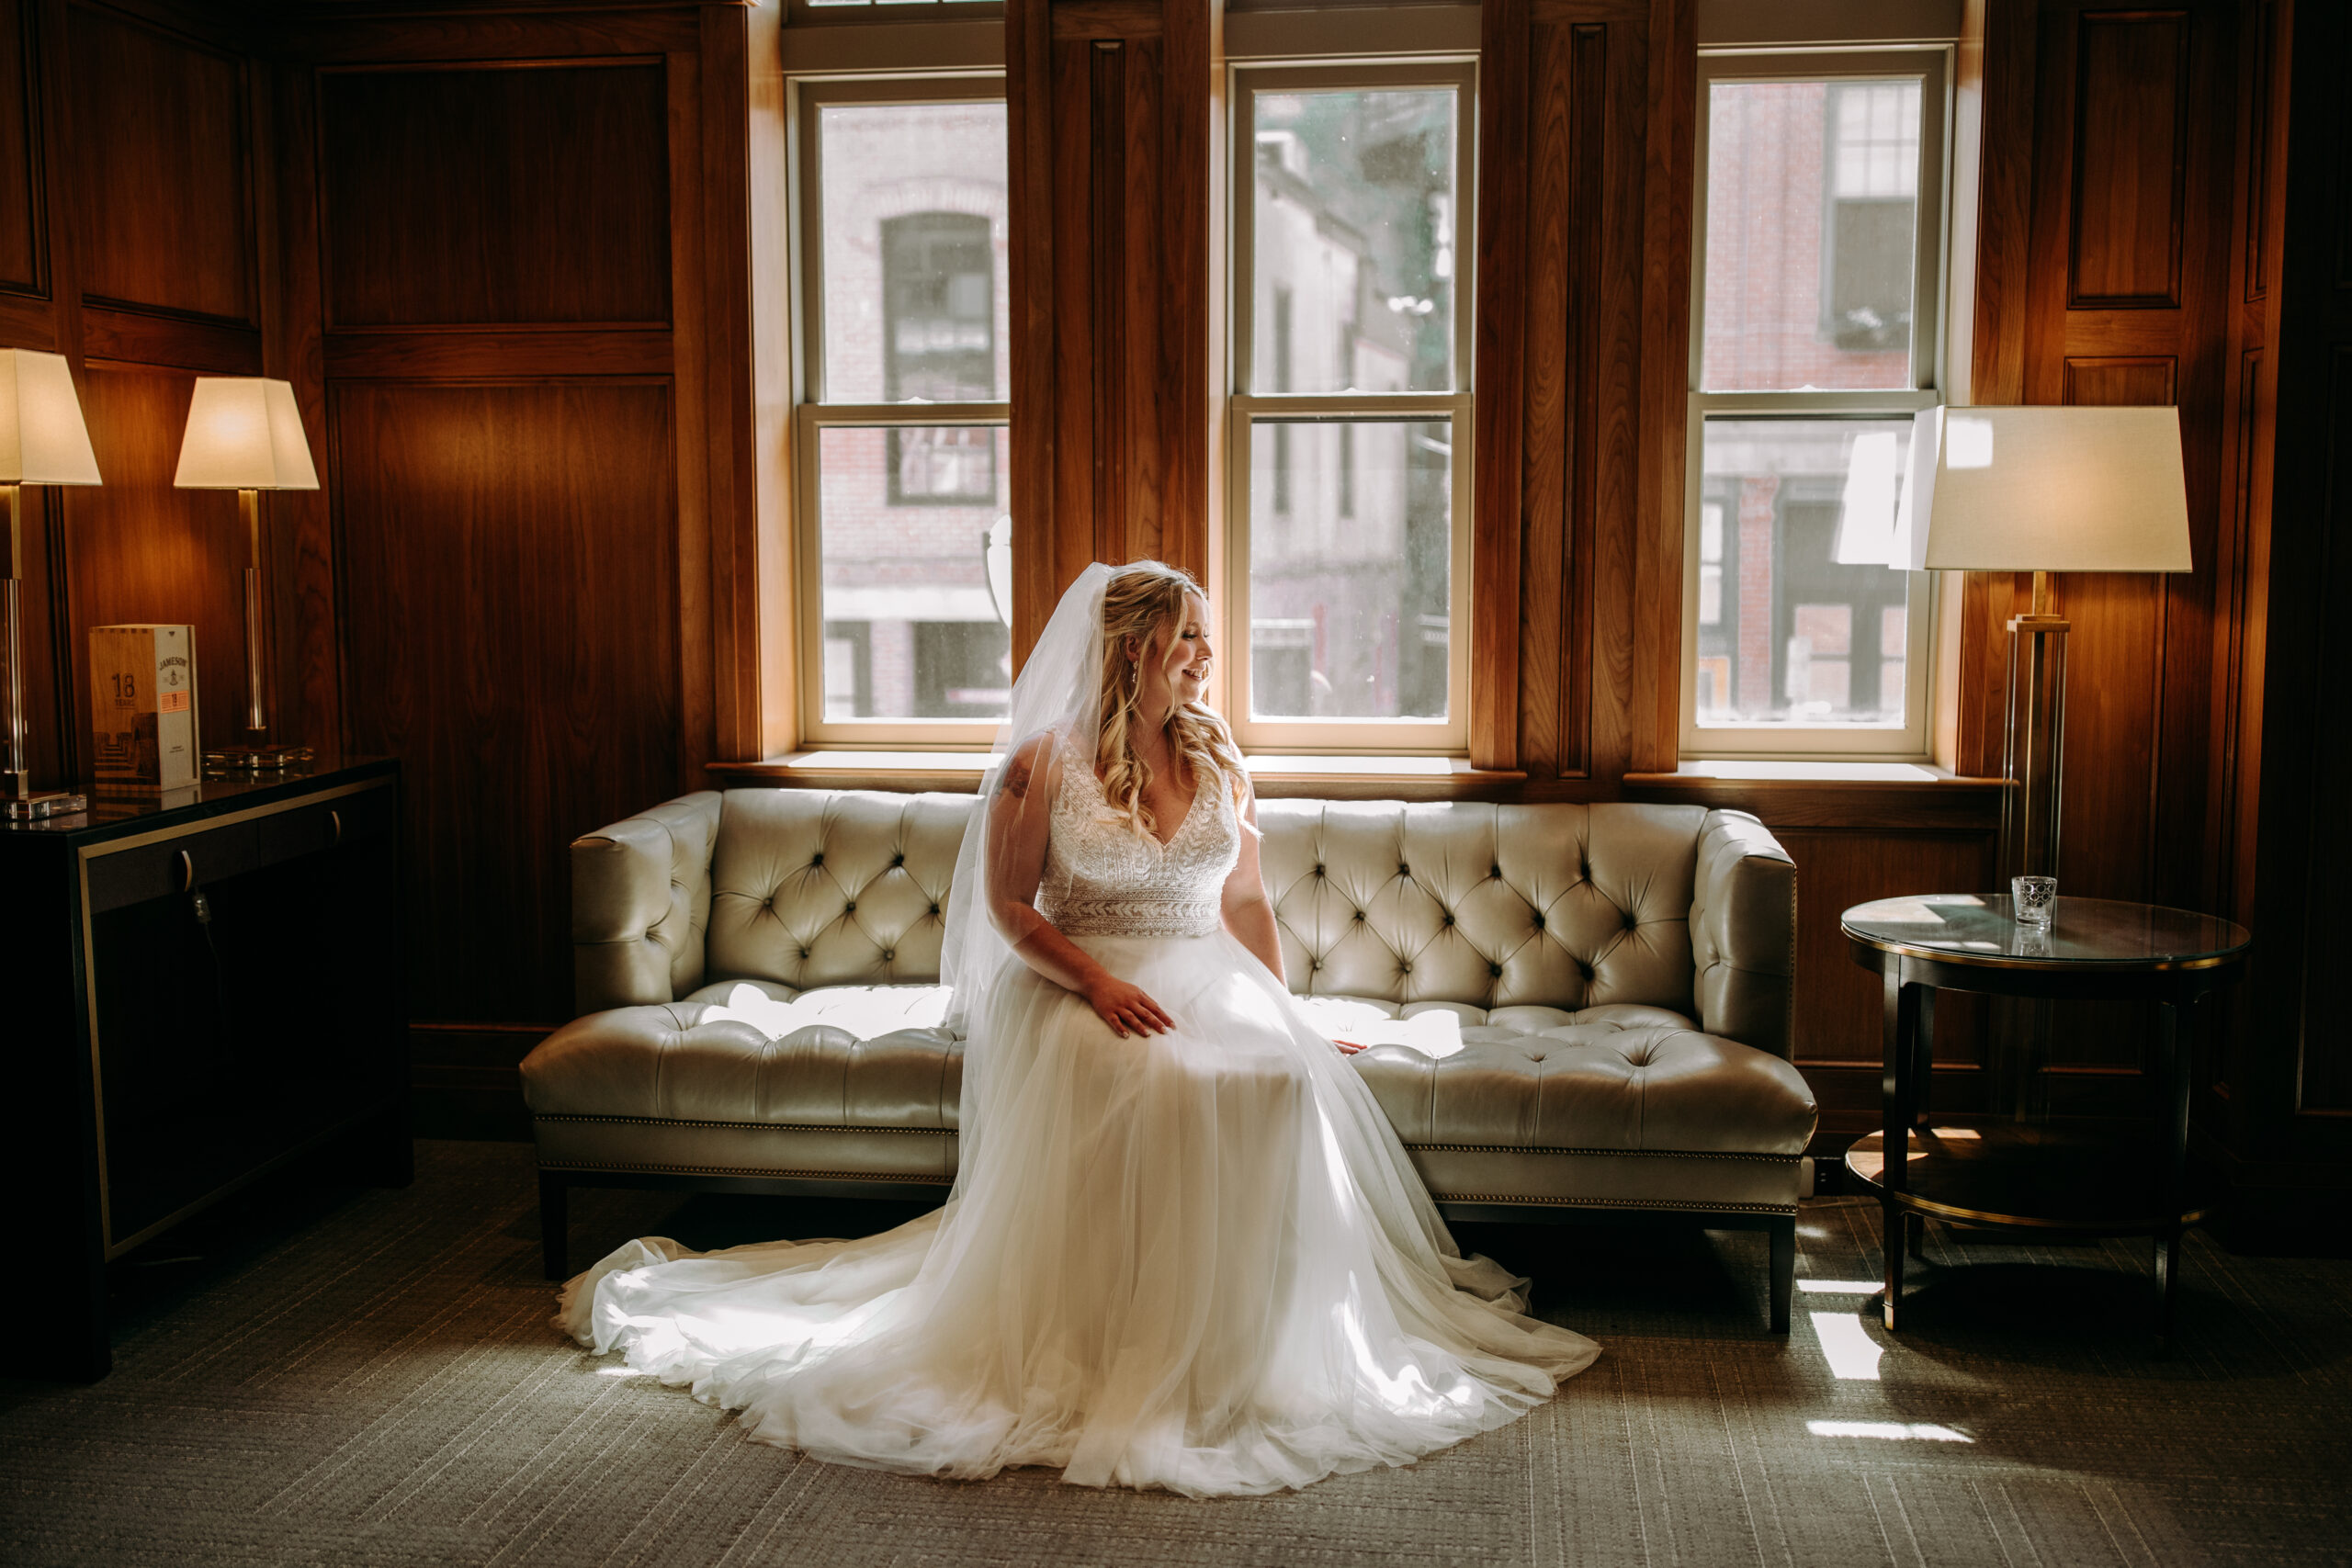 Blonde bride with her wedding dress and veil sitting on a tufted couch with natural light pouring in through the windows to backlight her while she waits for her wedding to start at the Portland Ocean Gateway in Portland Maine 